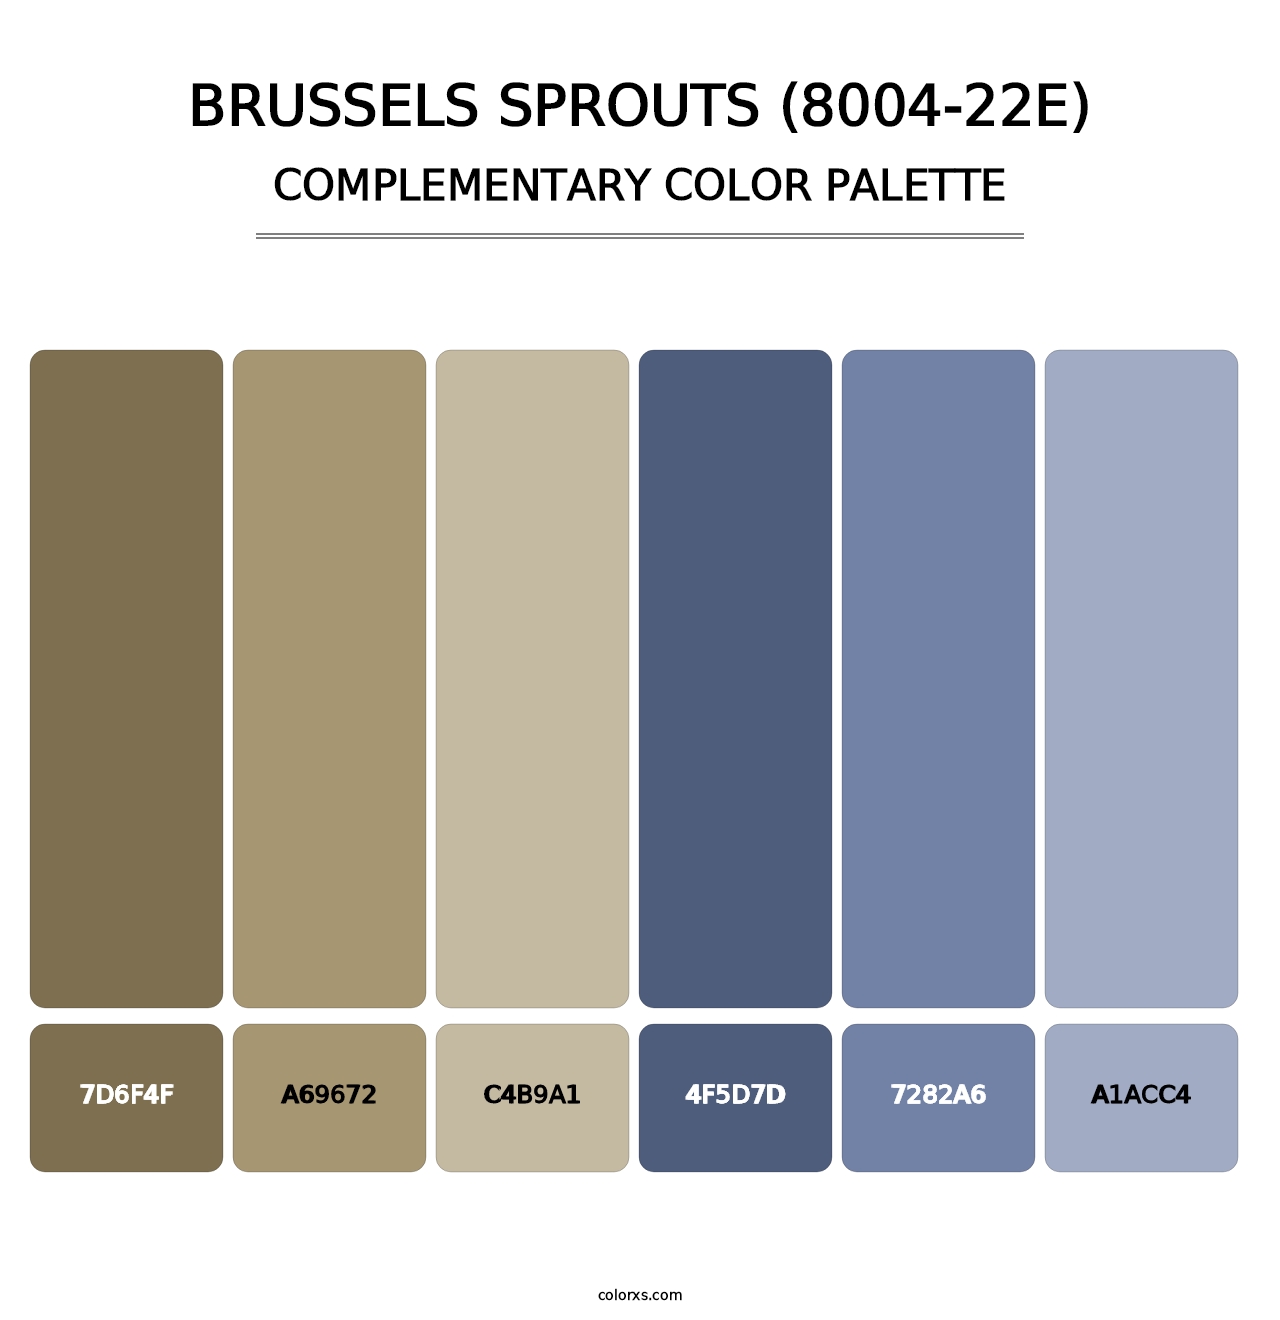 Brussels Sprouts (8004-22E) - Complementary Color Palette